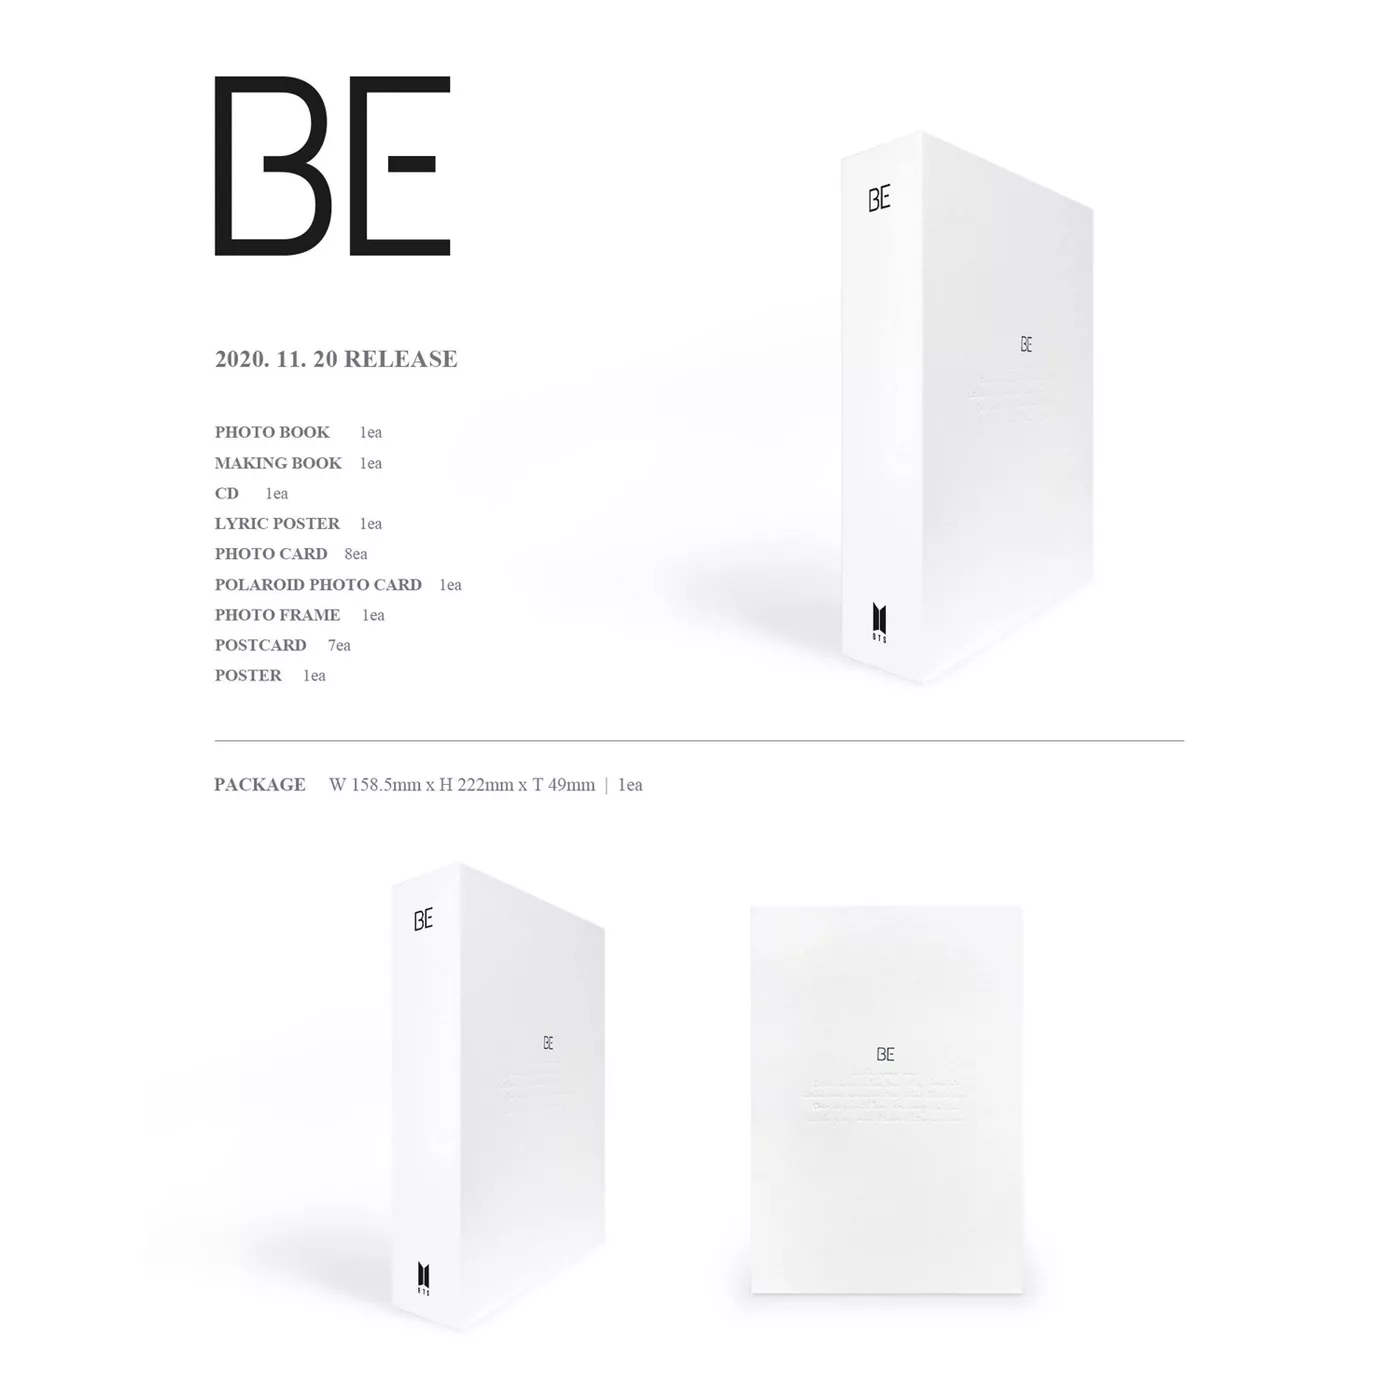 BTS - BE (Deluxe Edition) (CD) - image 2 of 10